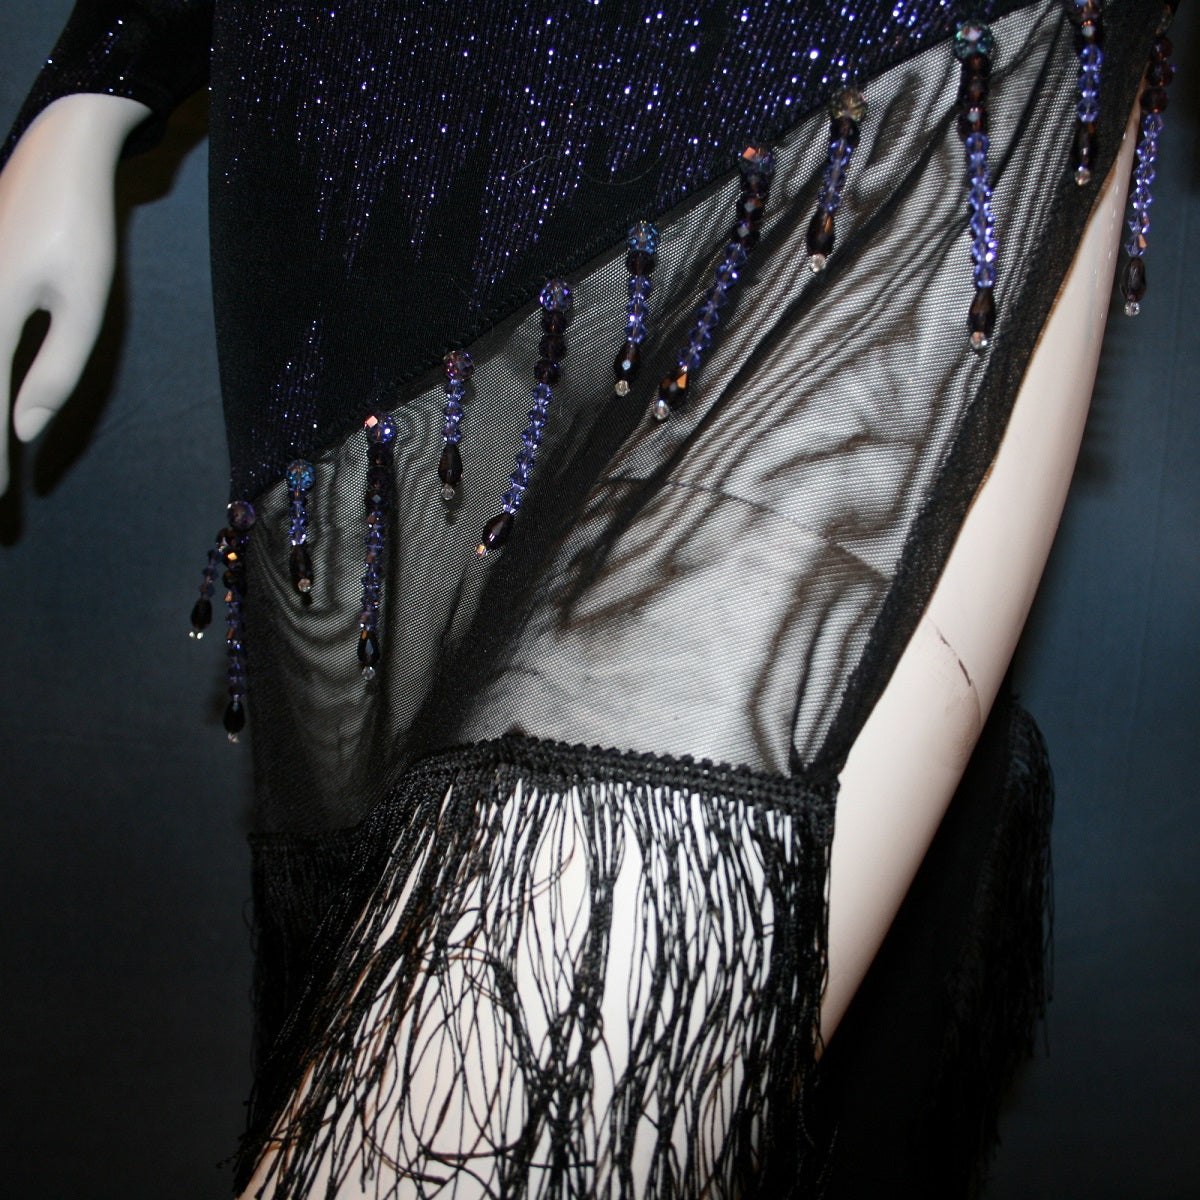 close details of Latin/rhythm/tango dress created in black glitter slinky with an awesome electrifying tanzinite/perwinkle glitter pattern! It features one long sleeve, lattice work detailing up the left side, a short skirt line in front that angles down to a long peak in the back, with a sheer mesh inset, fringe & Swarovski hand beading in tanzanite & black.